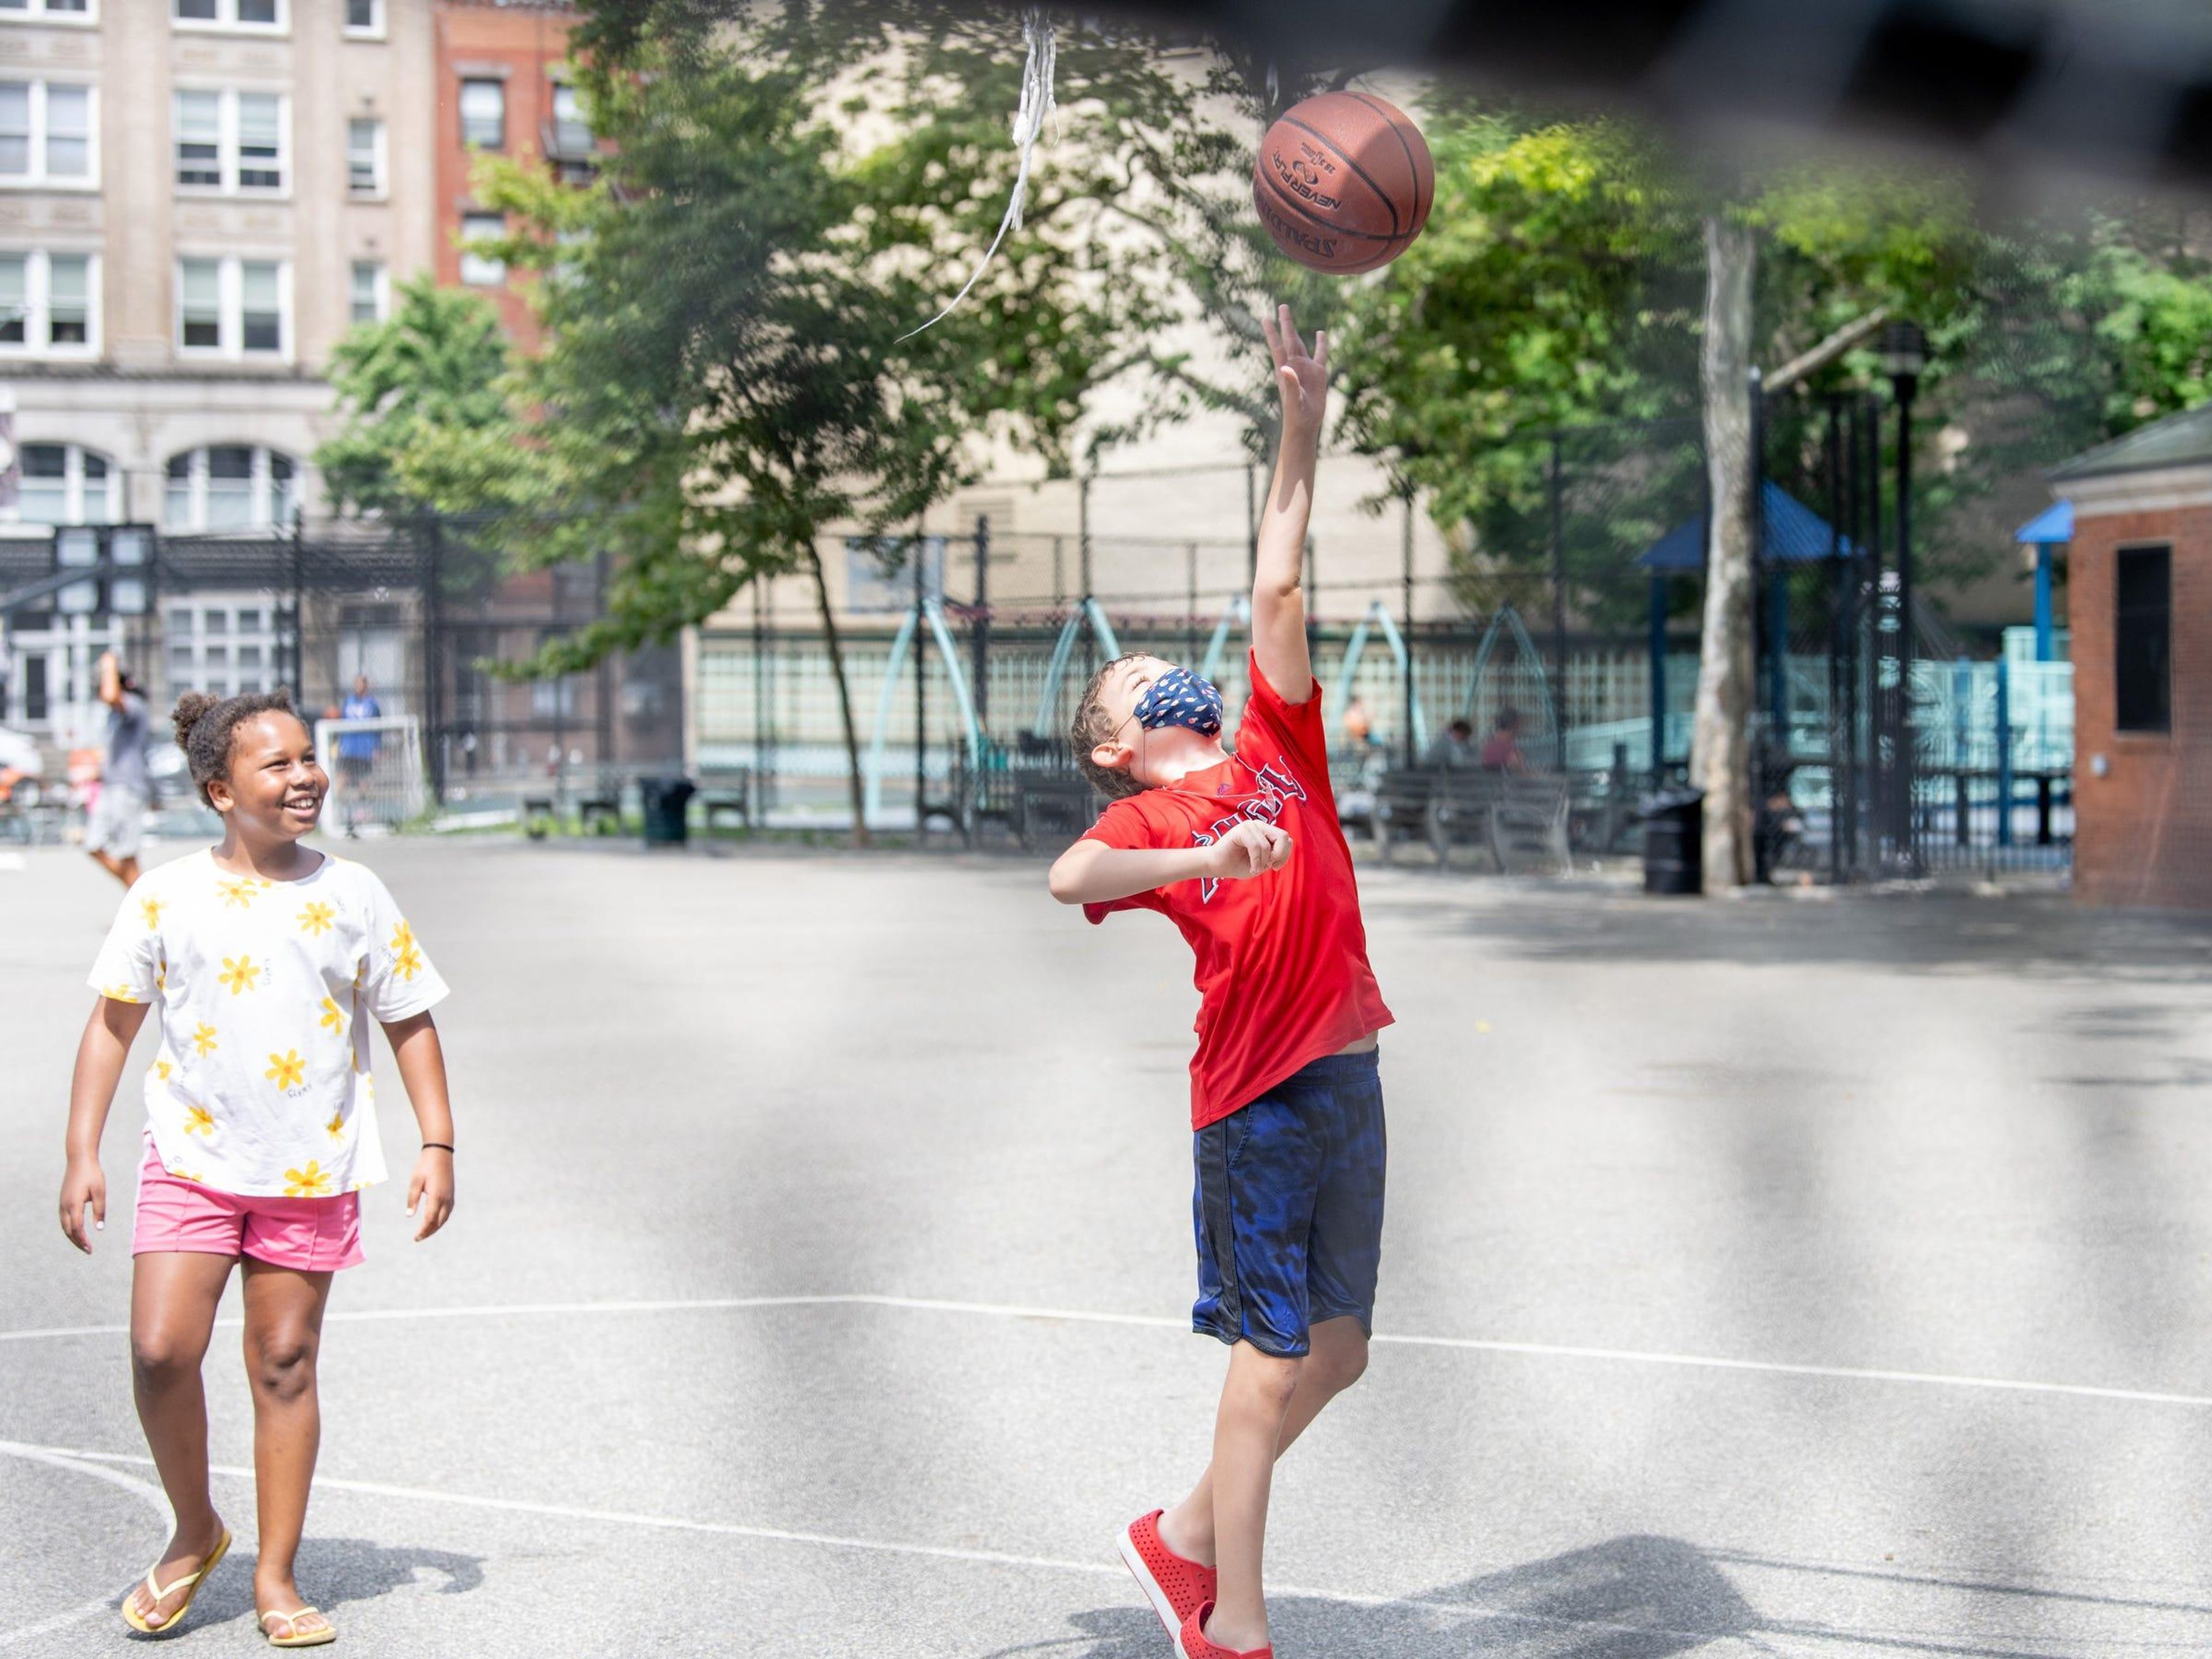 Two children play on a basketball court in New York City on July 30, 2020.